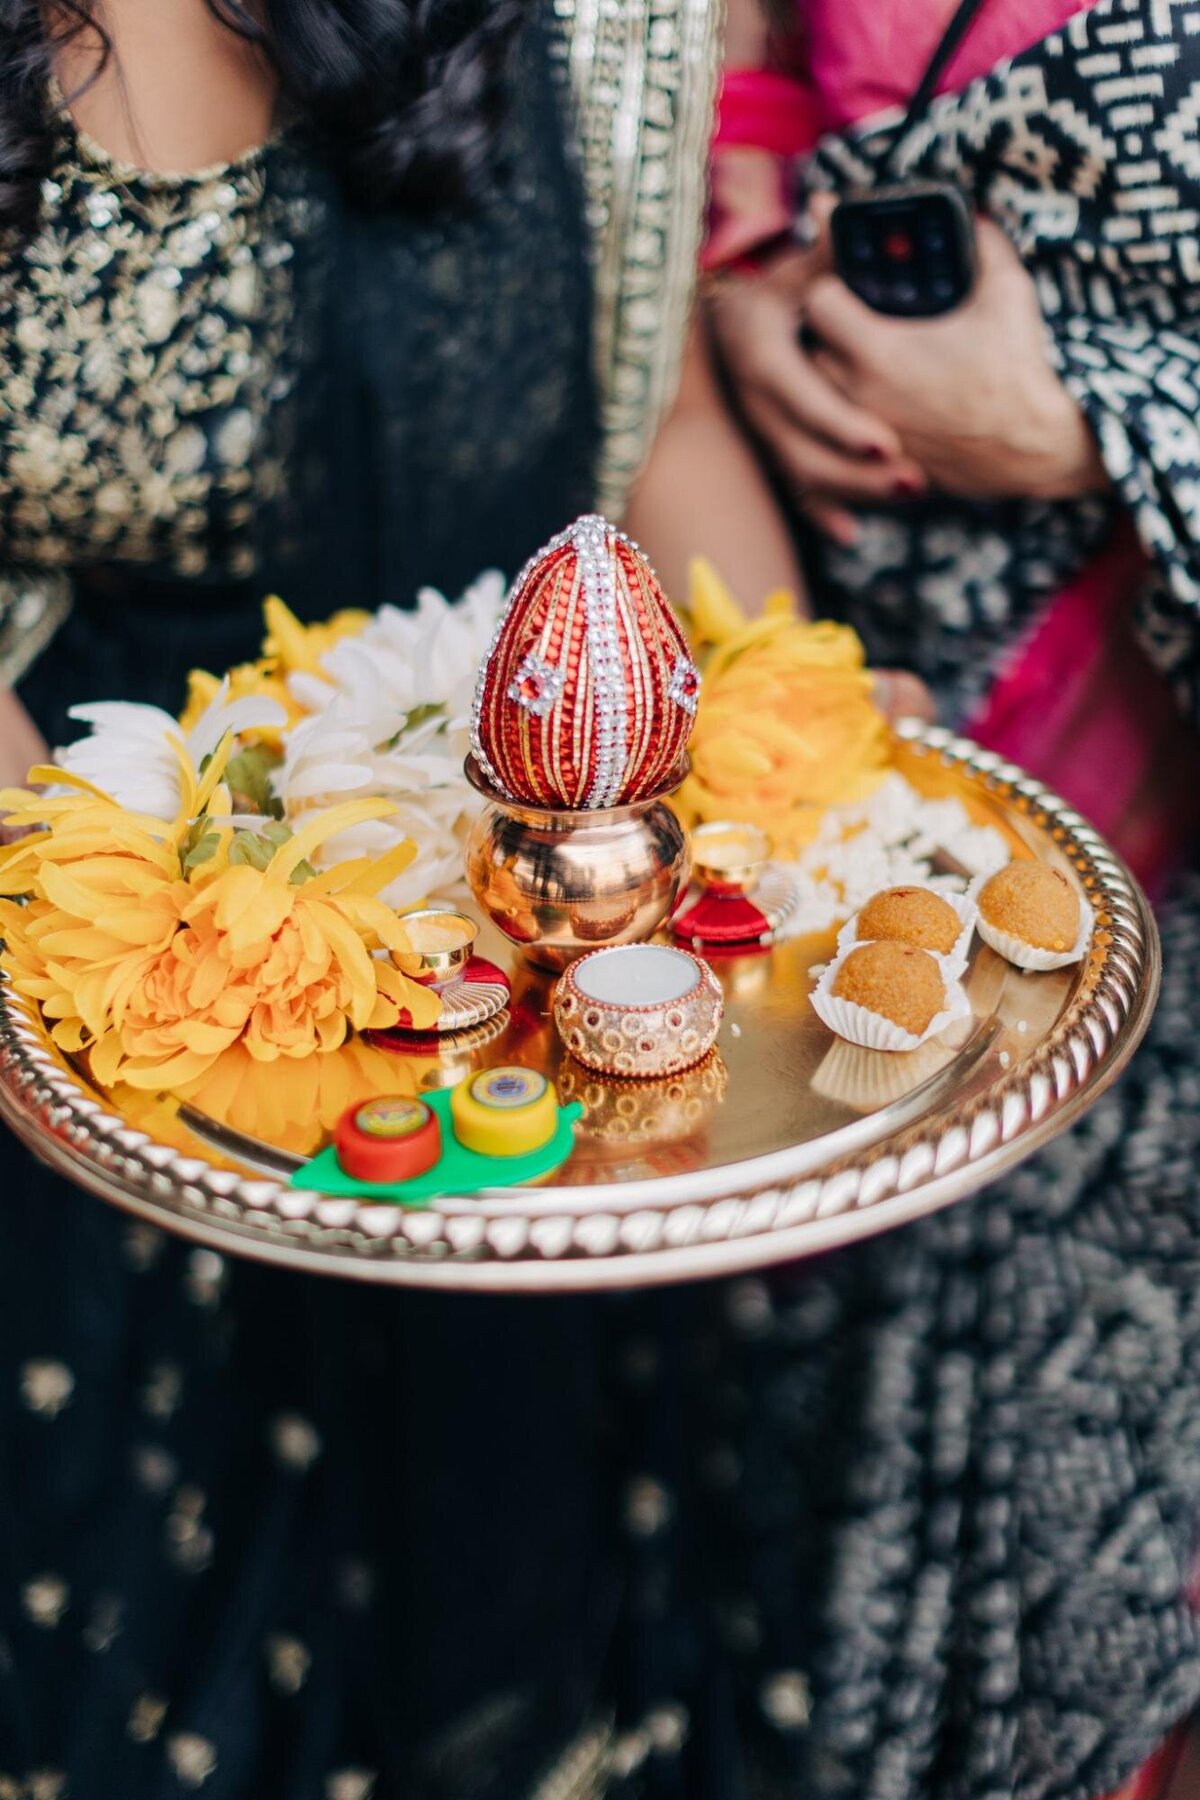 A decorative tray held by a woman, displaying flowers, a small ornate pot, and ritualistic items, possibly at an indian cultural or religious ceremony.